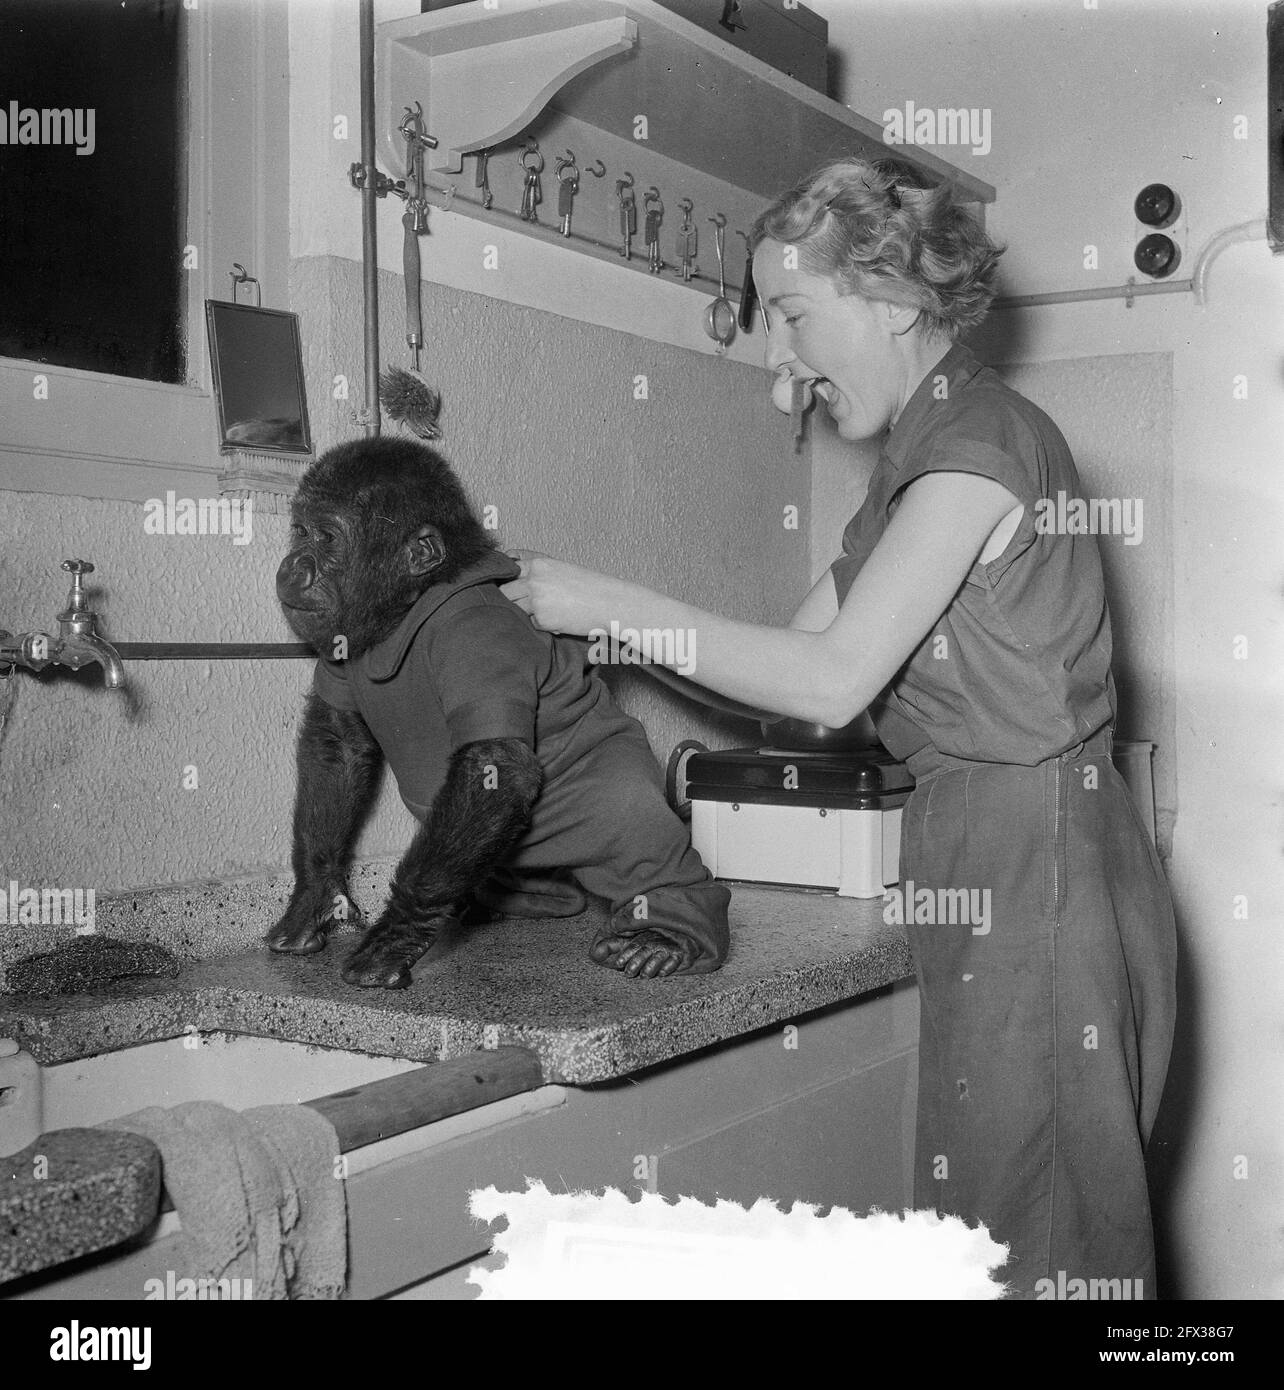 Artis the monkeys at breakfast, November 22, 1953, The Netherlands, 20th century press agency photo, news to remember, documentary, historic photography 1945-1990, visual stories, human history of the Twentieth Century, capturing moments in time Stock Photo